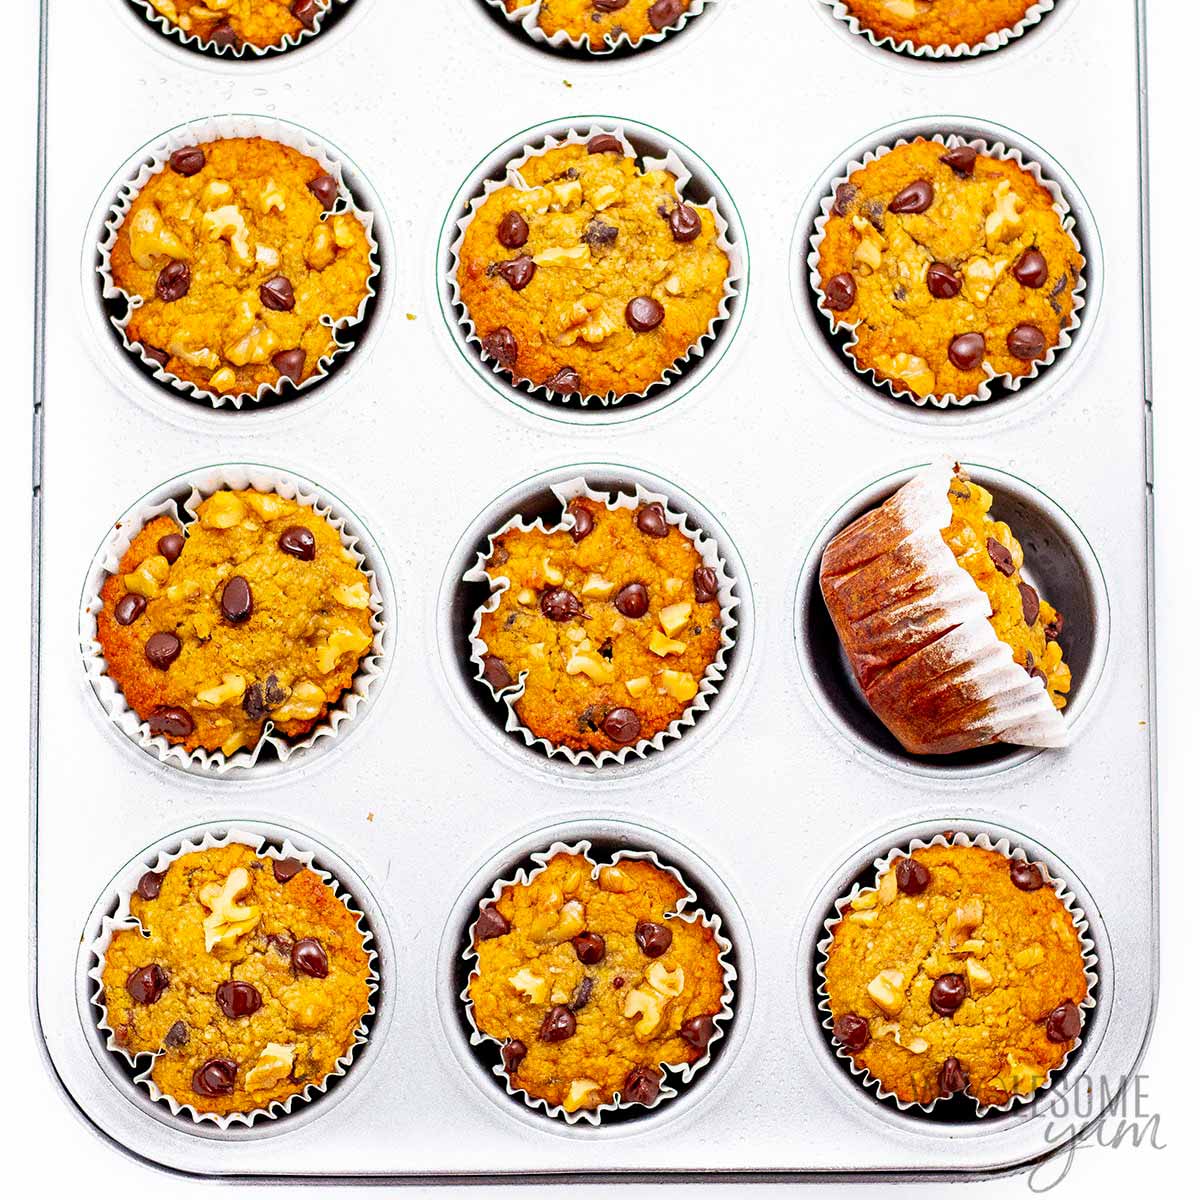 Fully baked muffins in pan.